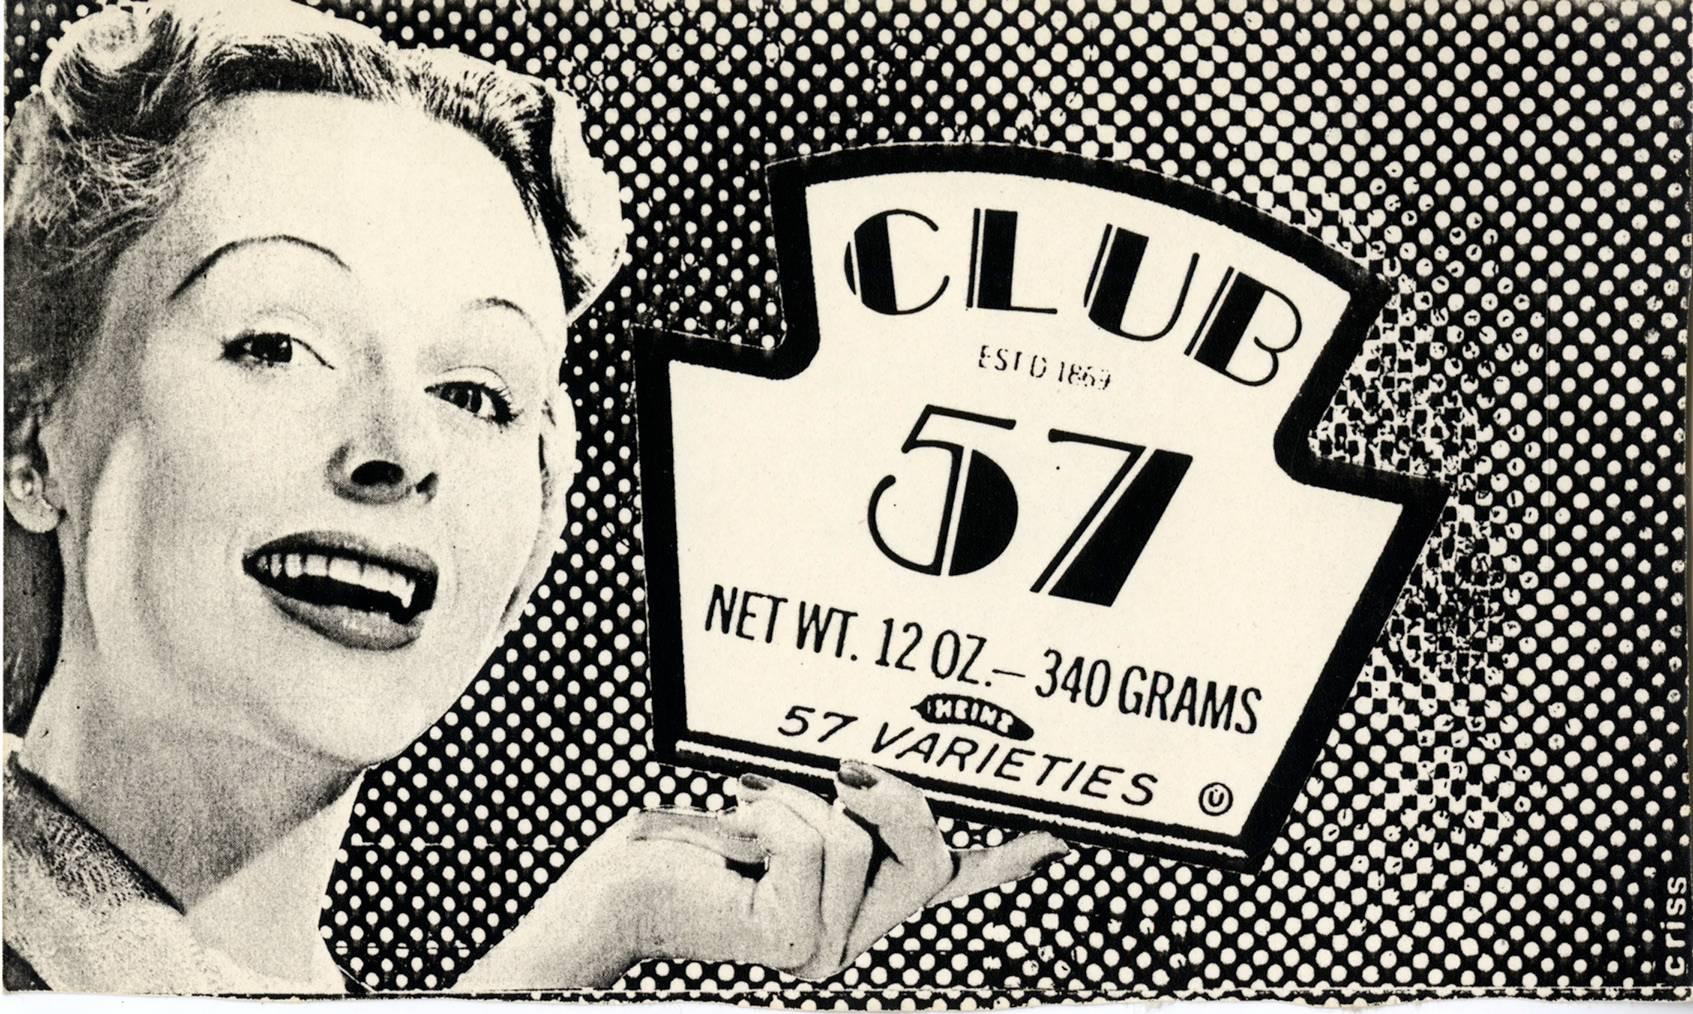 Original Club 57 flyer NY (Keith Haring Kenny Scharf related) - Photograph by Unknown